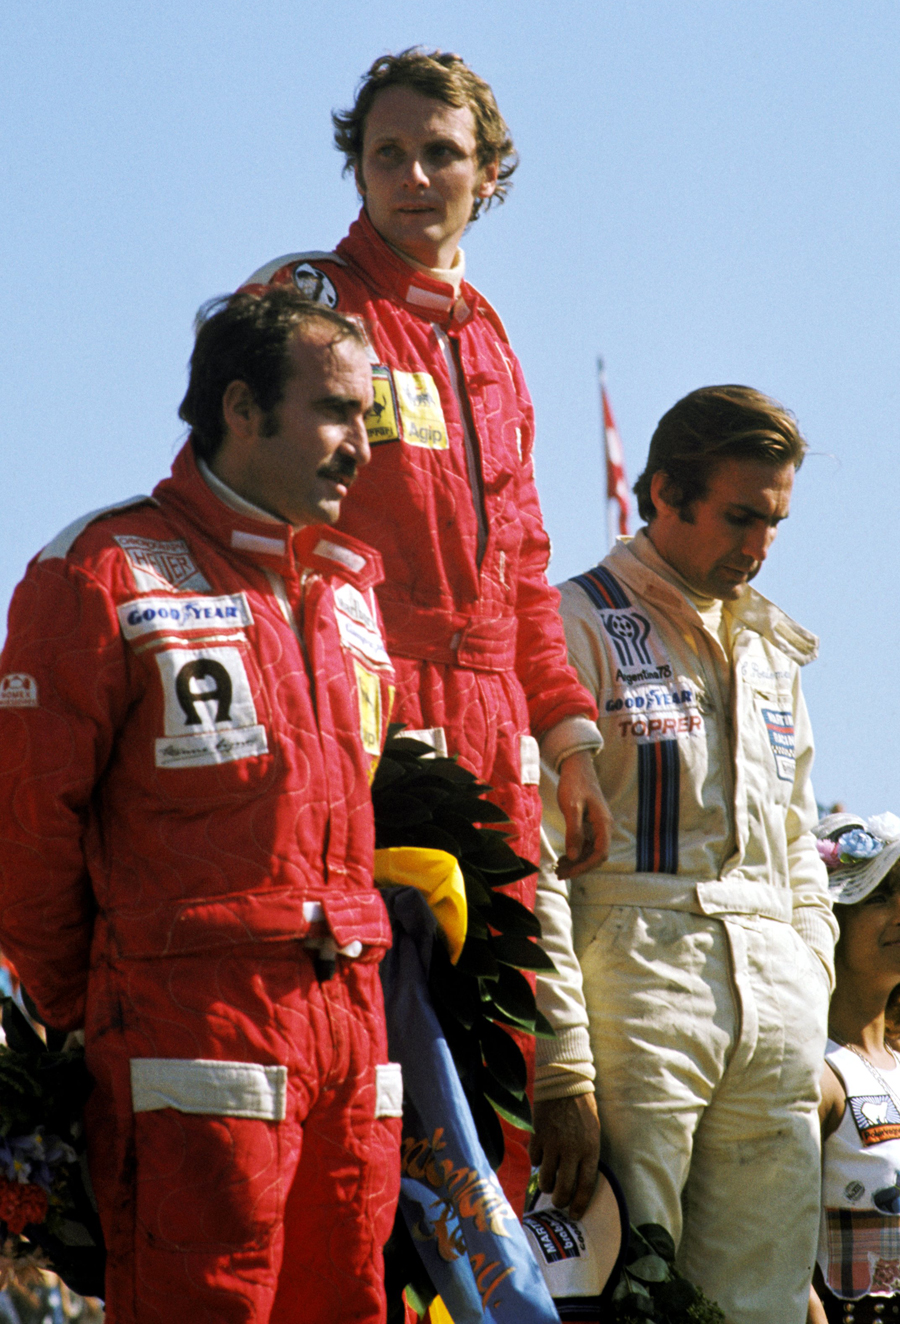 The podium at the Swedish Grand Prix - Clay Regazzoni, who finished third, race winner Niki Lauda and second-placed Carlos Reutemann